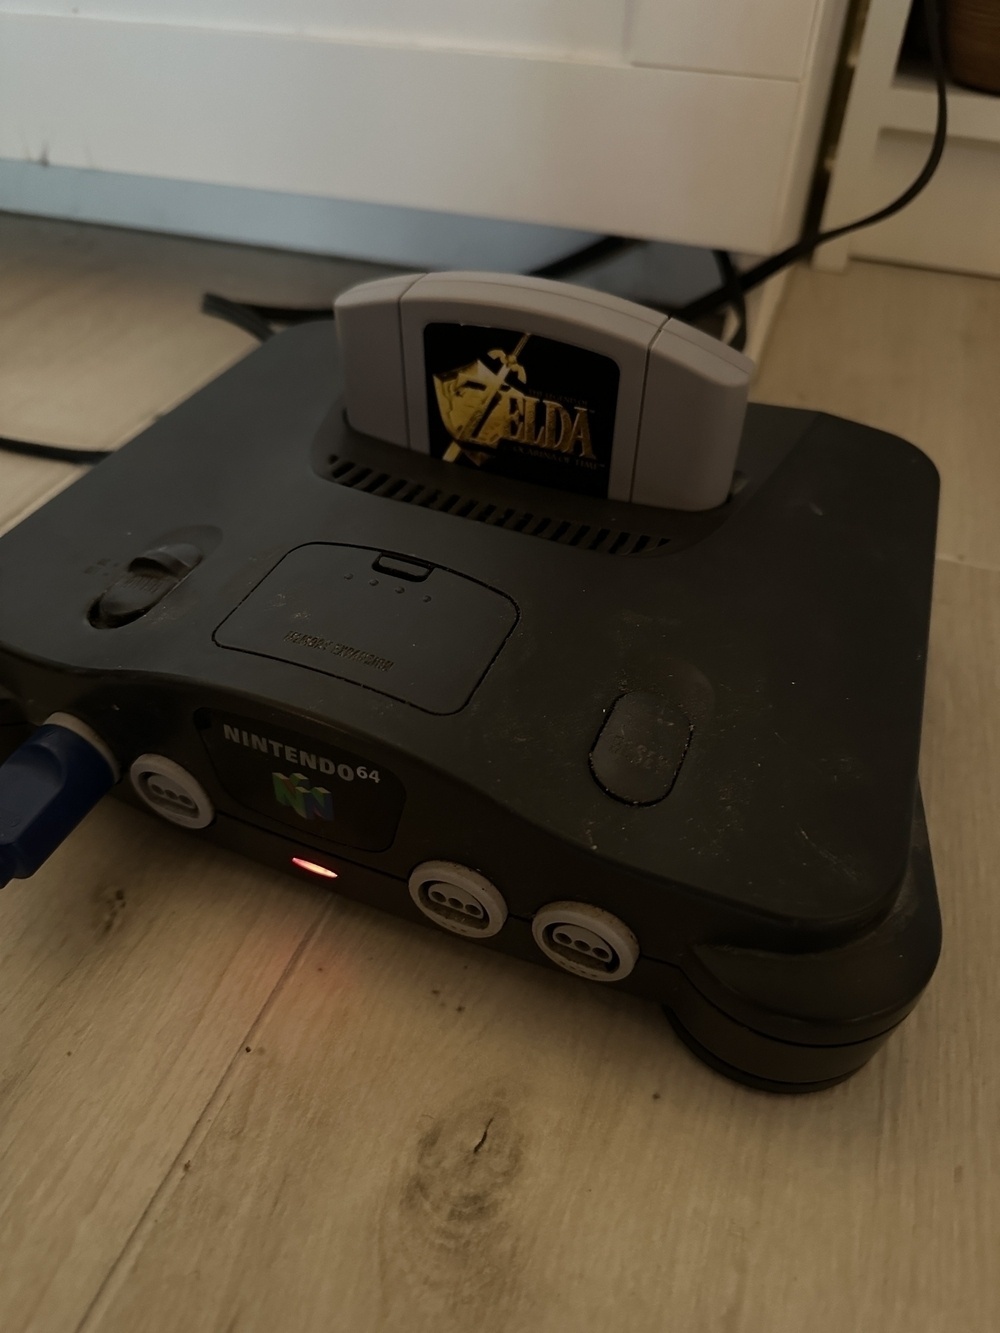 A Nintendo 64 console with a "Legend of Zelda" game cartridge inserted.